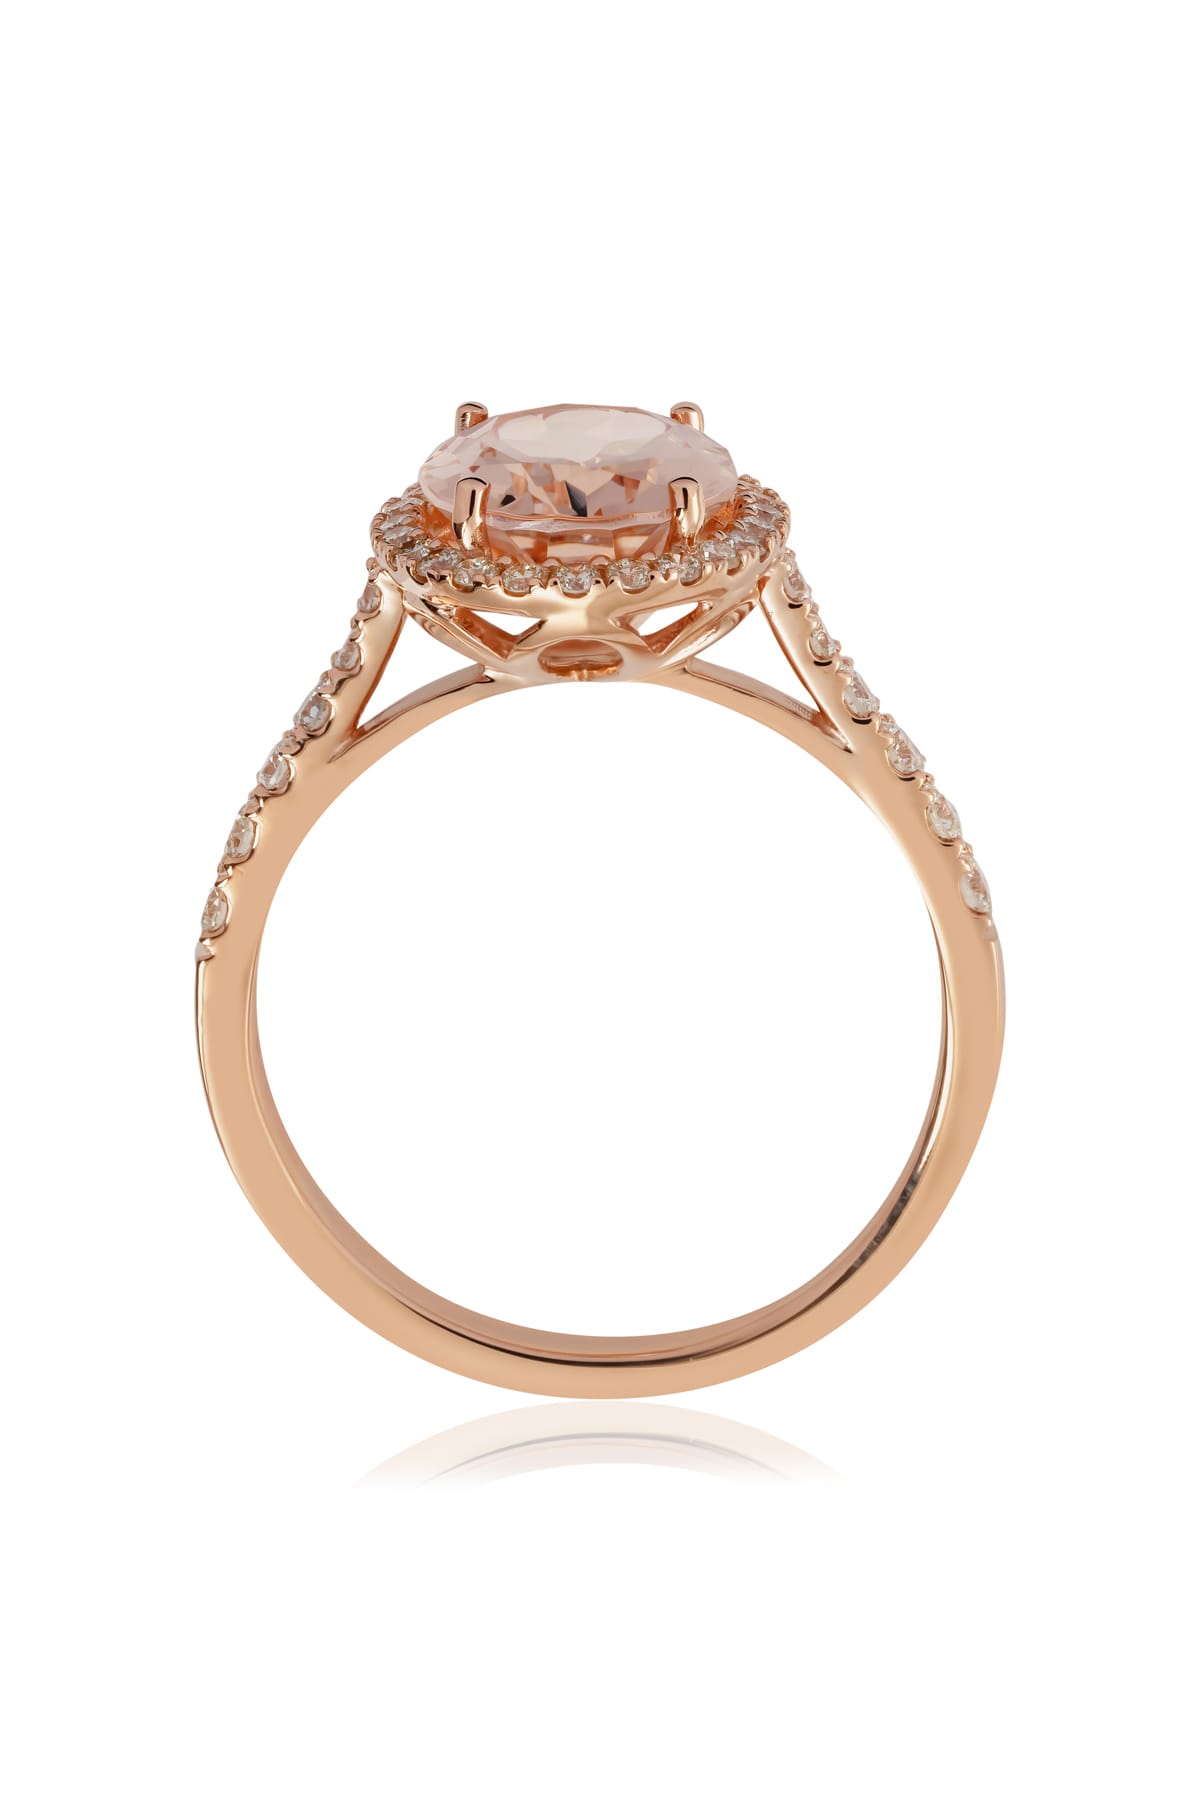 2.51ct Oval Morganite And Diamond Halo Ring from LeGassick.